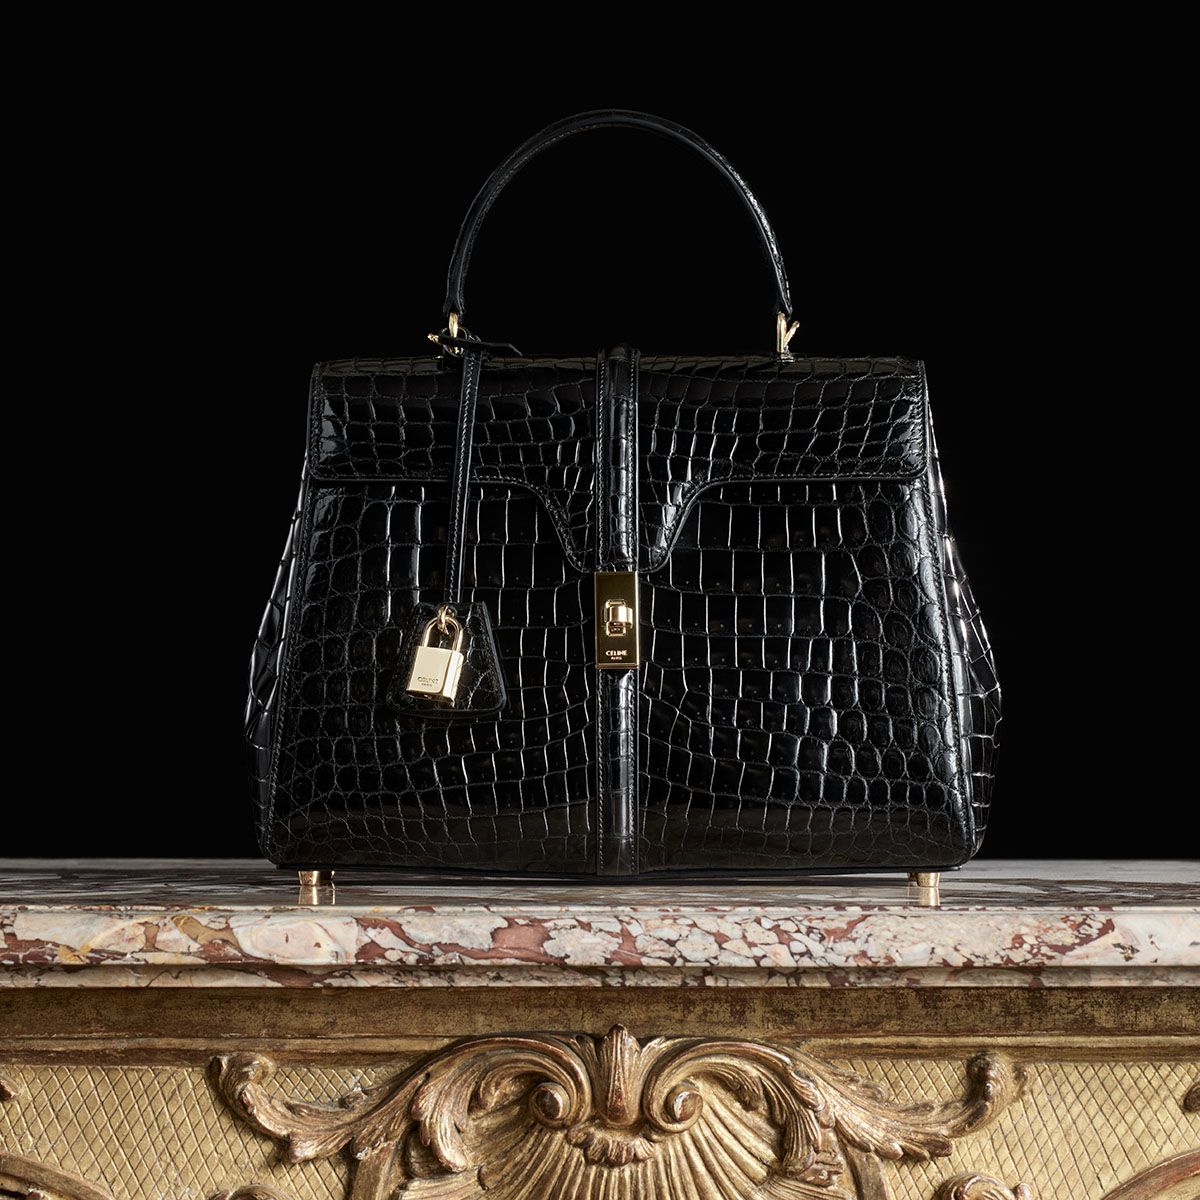 Celine Has a Brand New, Very Luxe, Bag